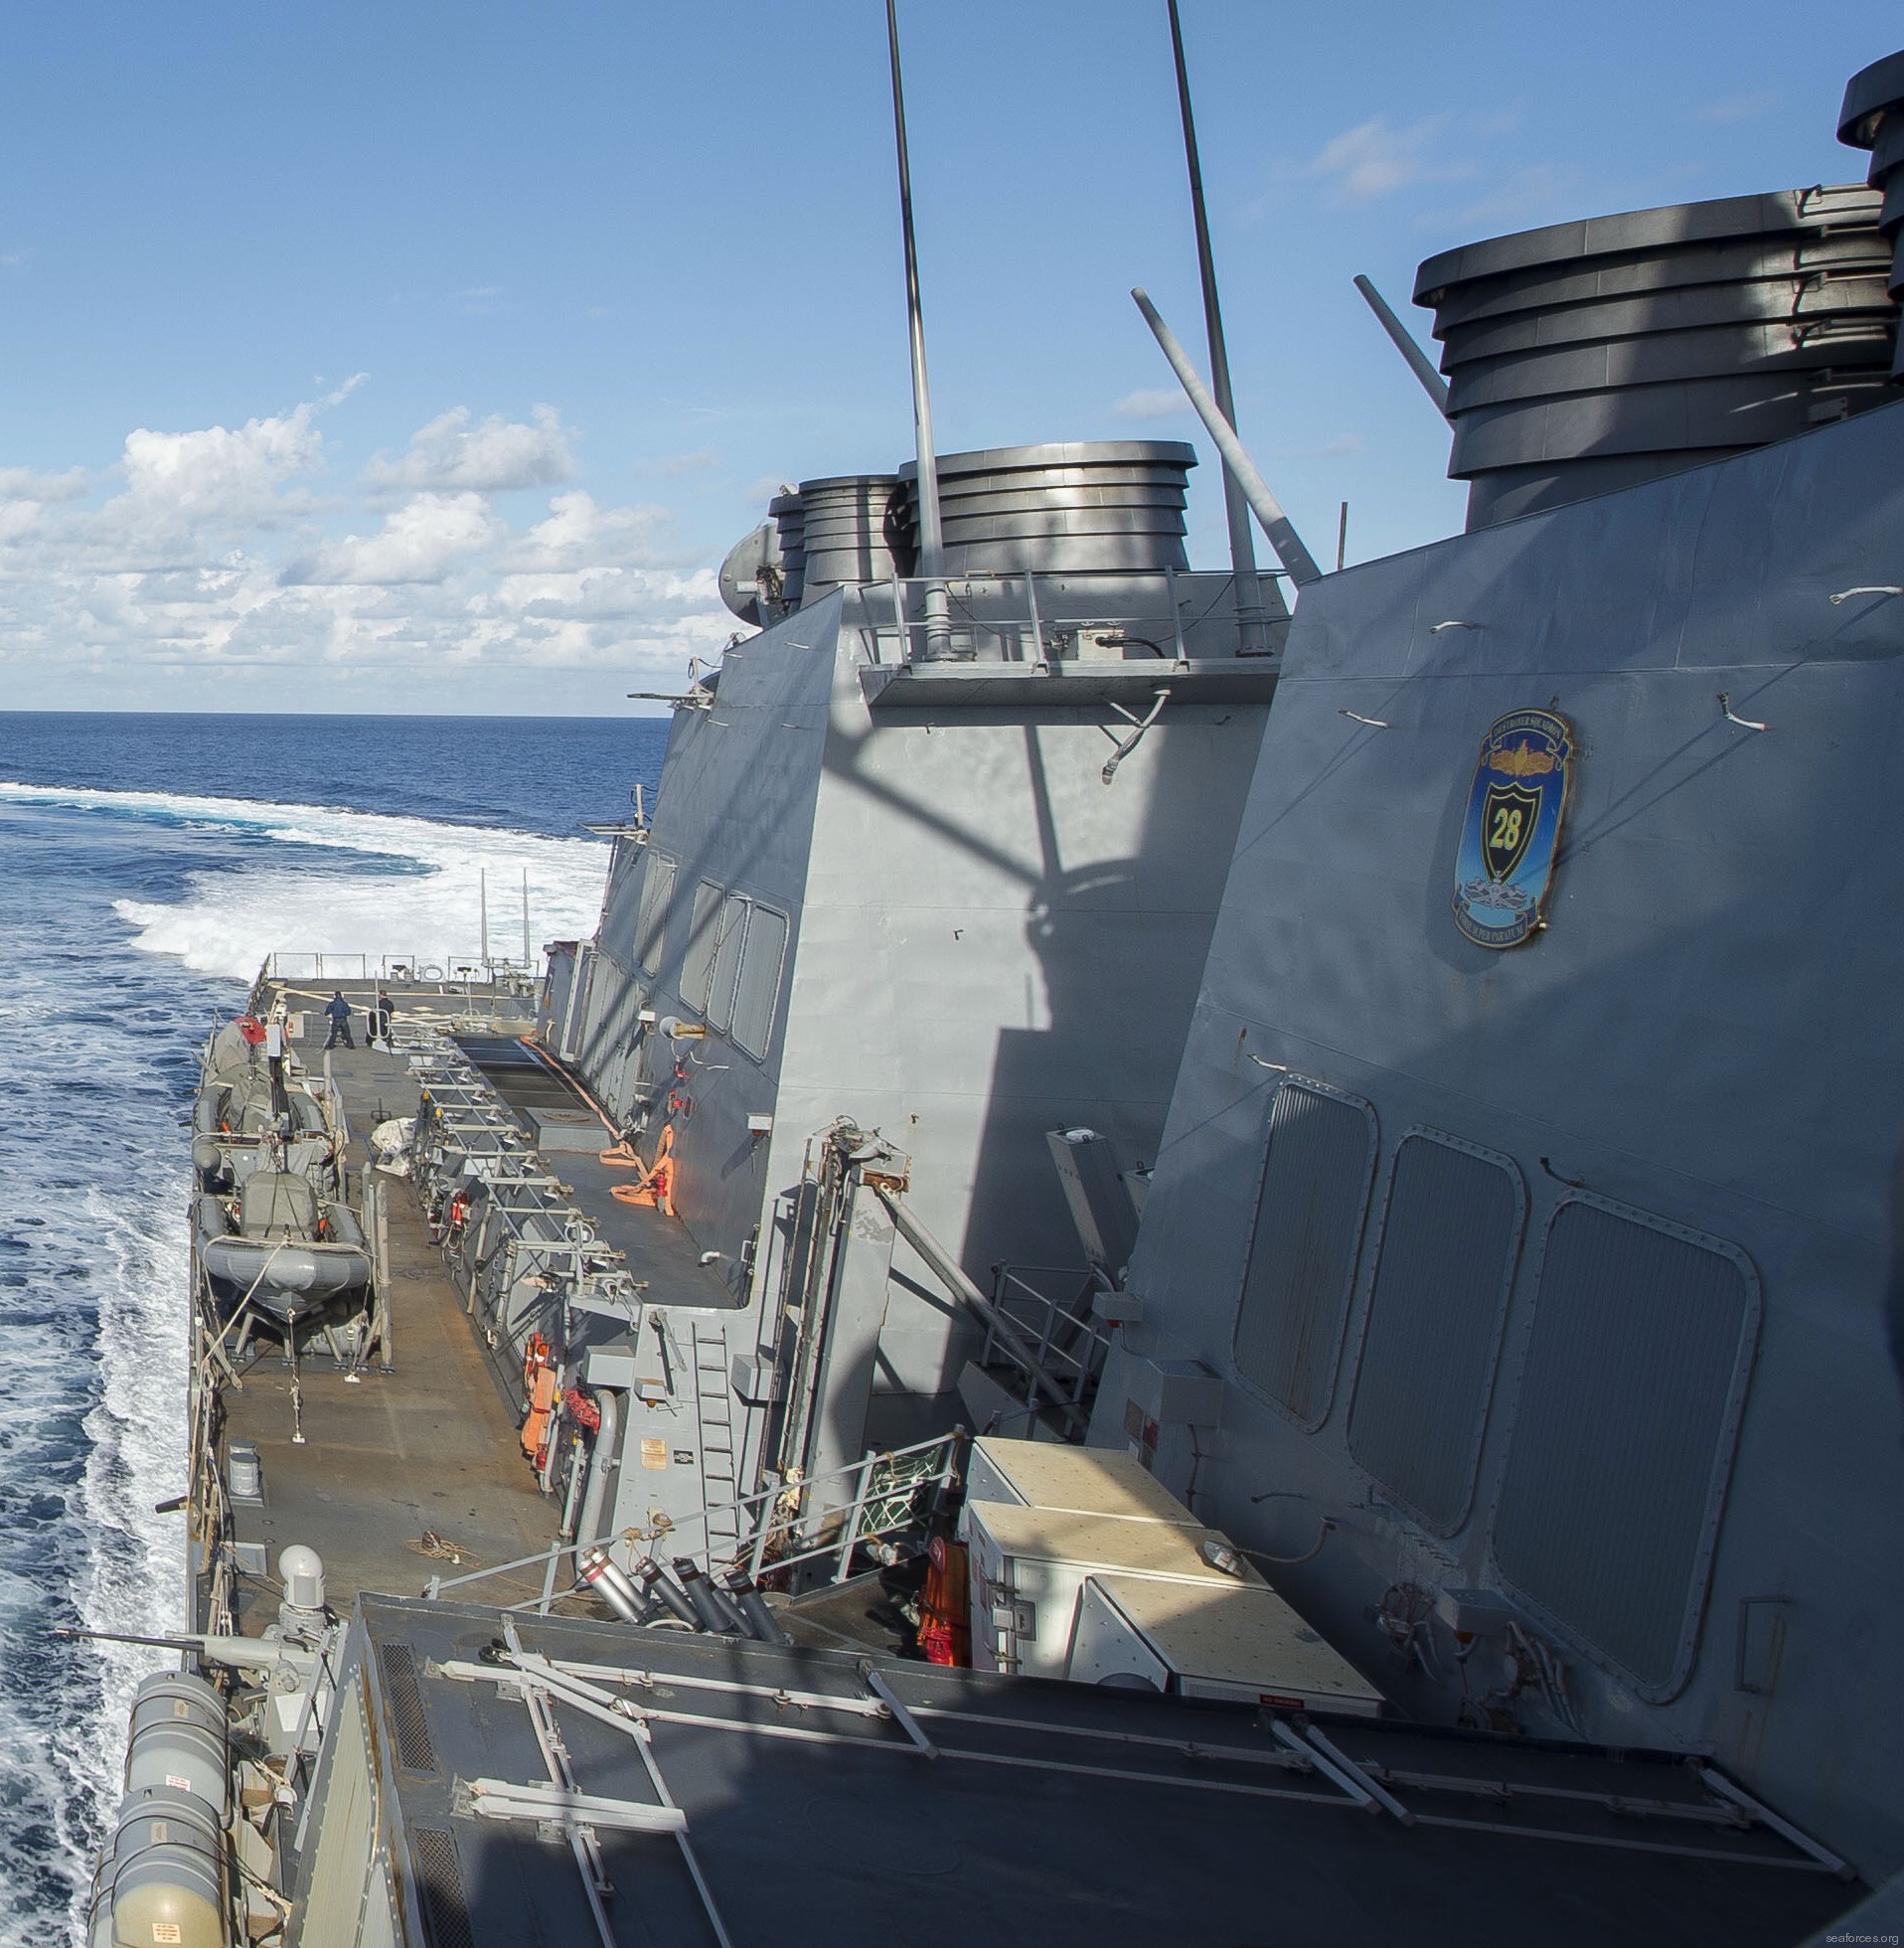 ddg-67 uss cole guided missile destroyer arleigh burke class navy aegis 10